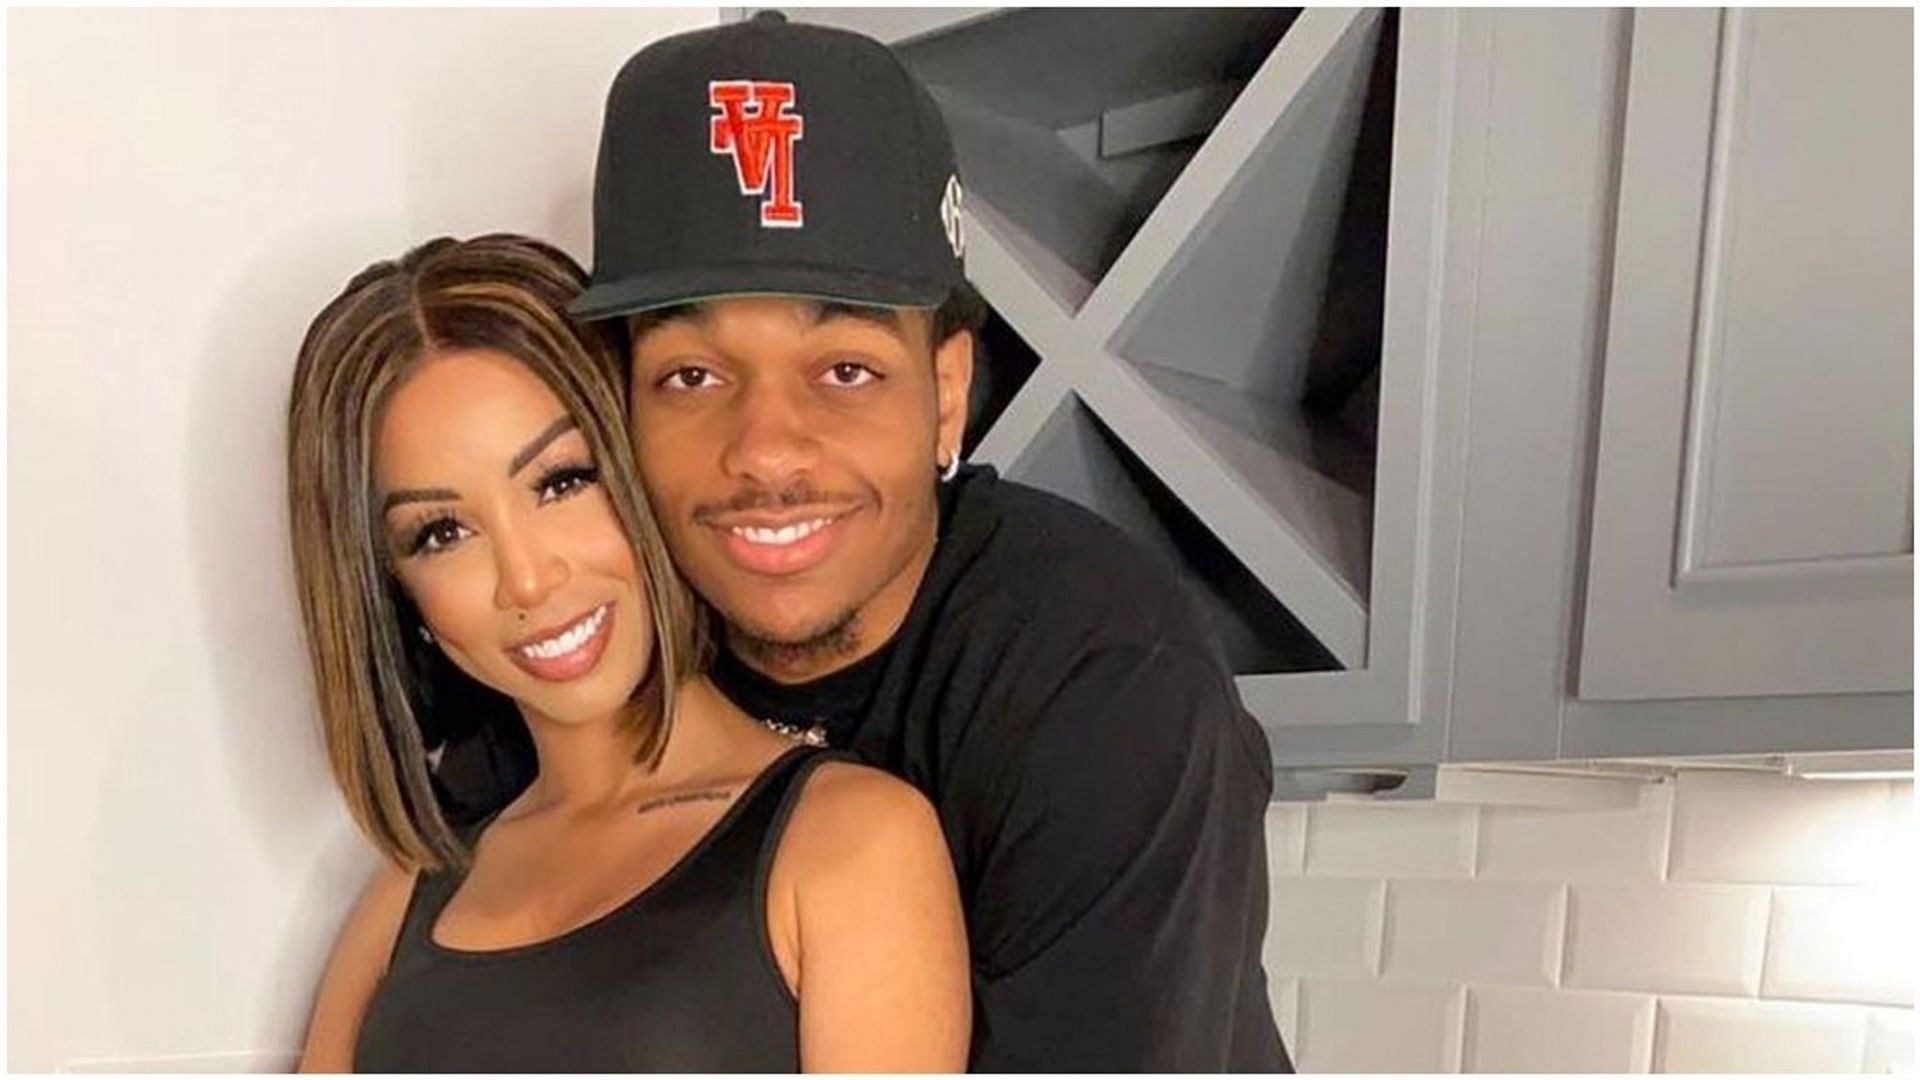 Brittany Renner accused of &quot;grooming&quot; PJ Washington (Image via Ballislife/ Facebook)